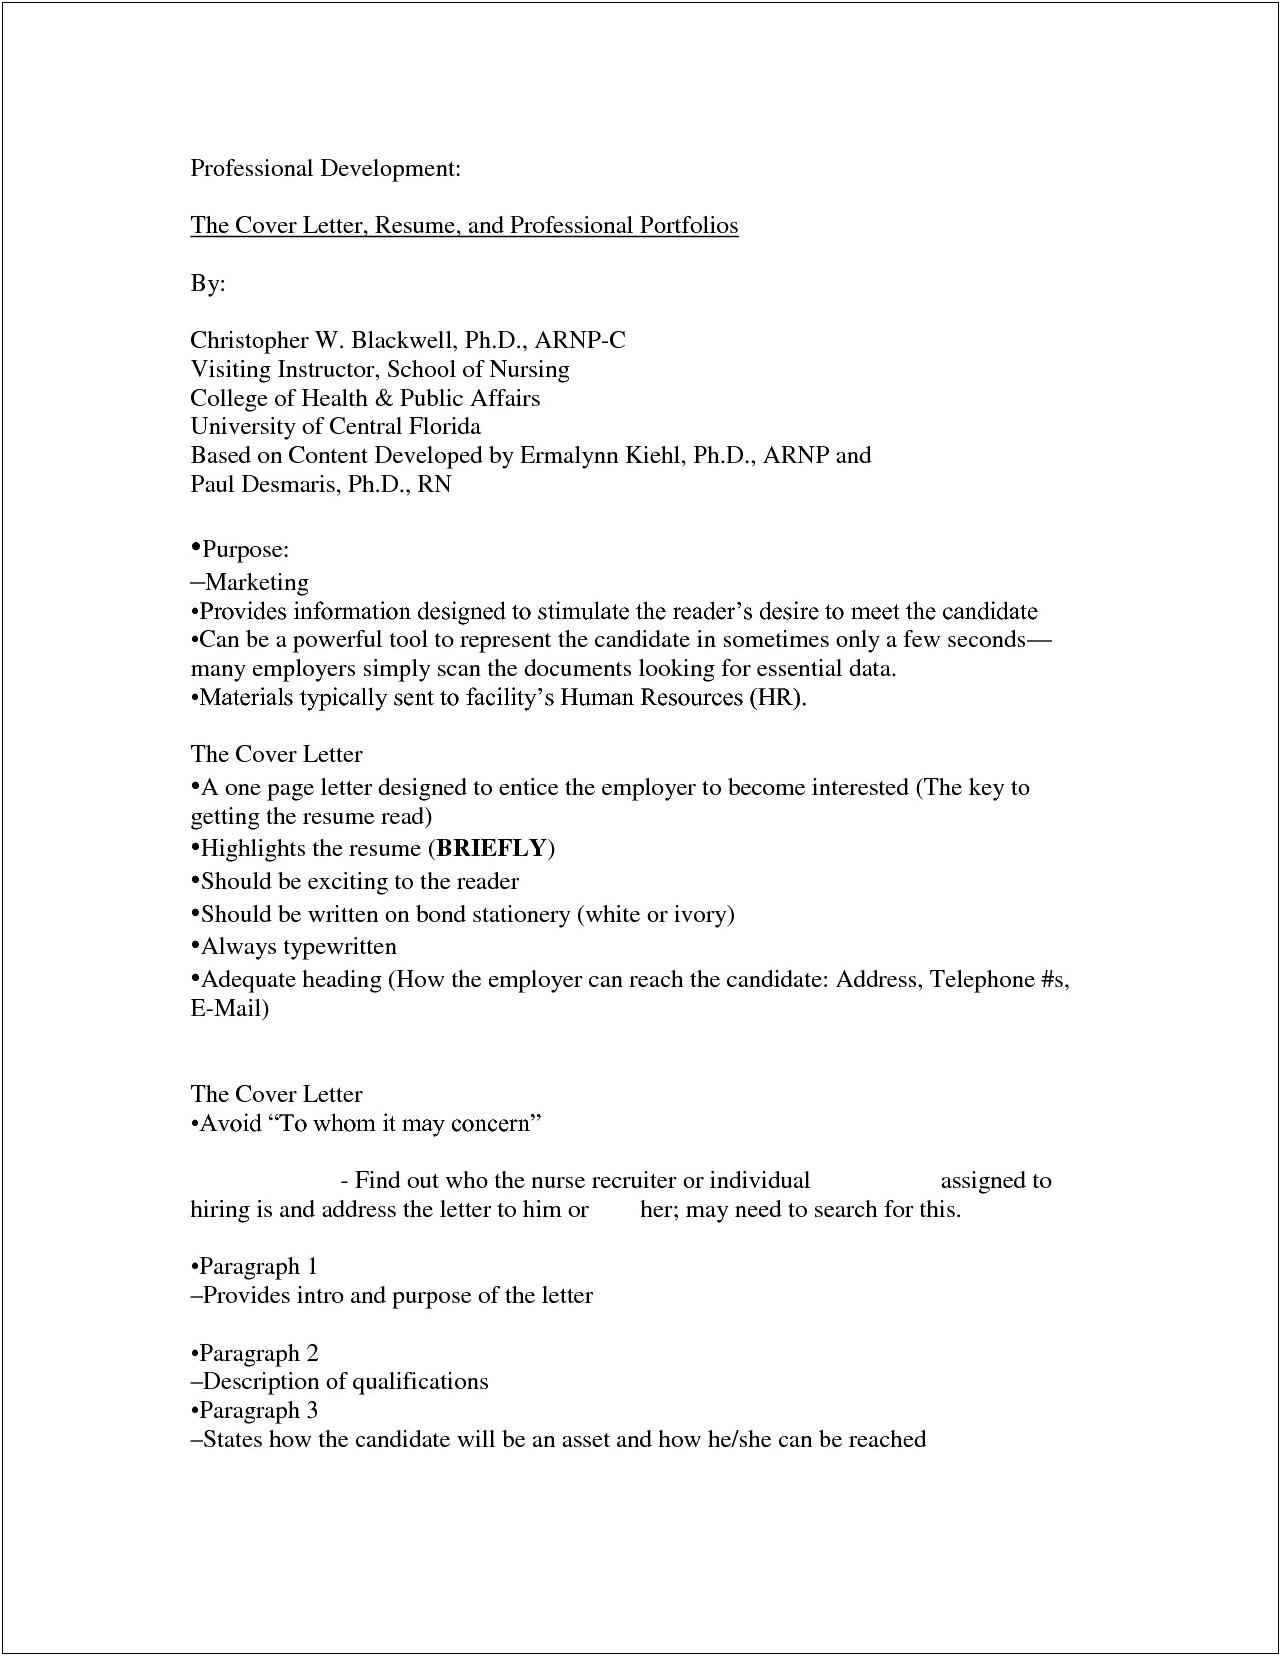 Profession Resume And Cover Letter Service